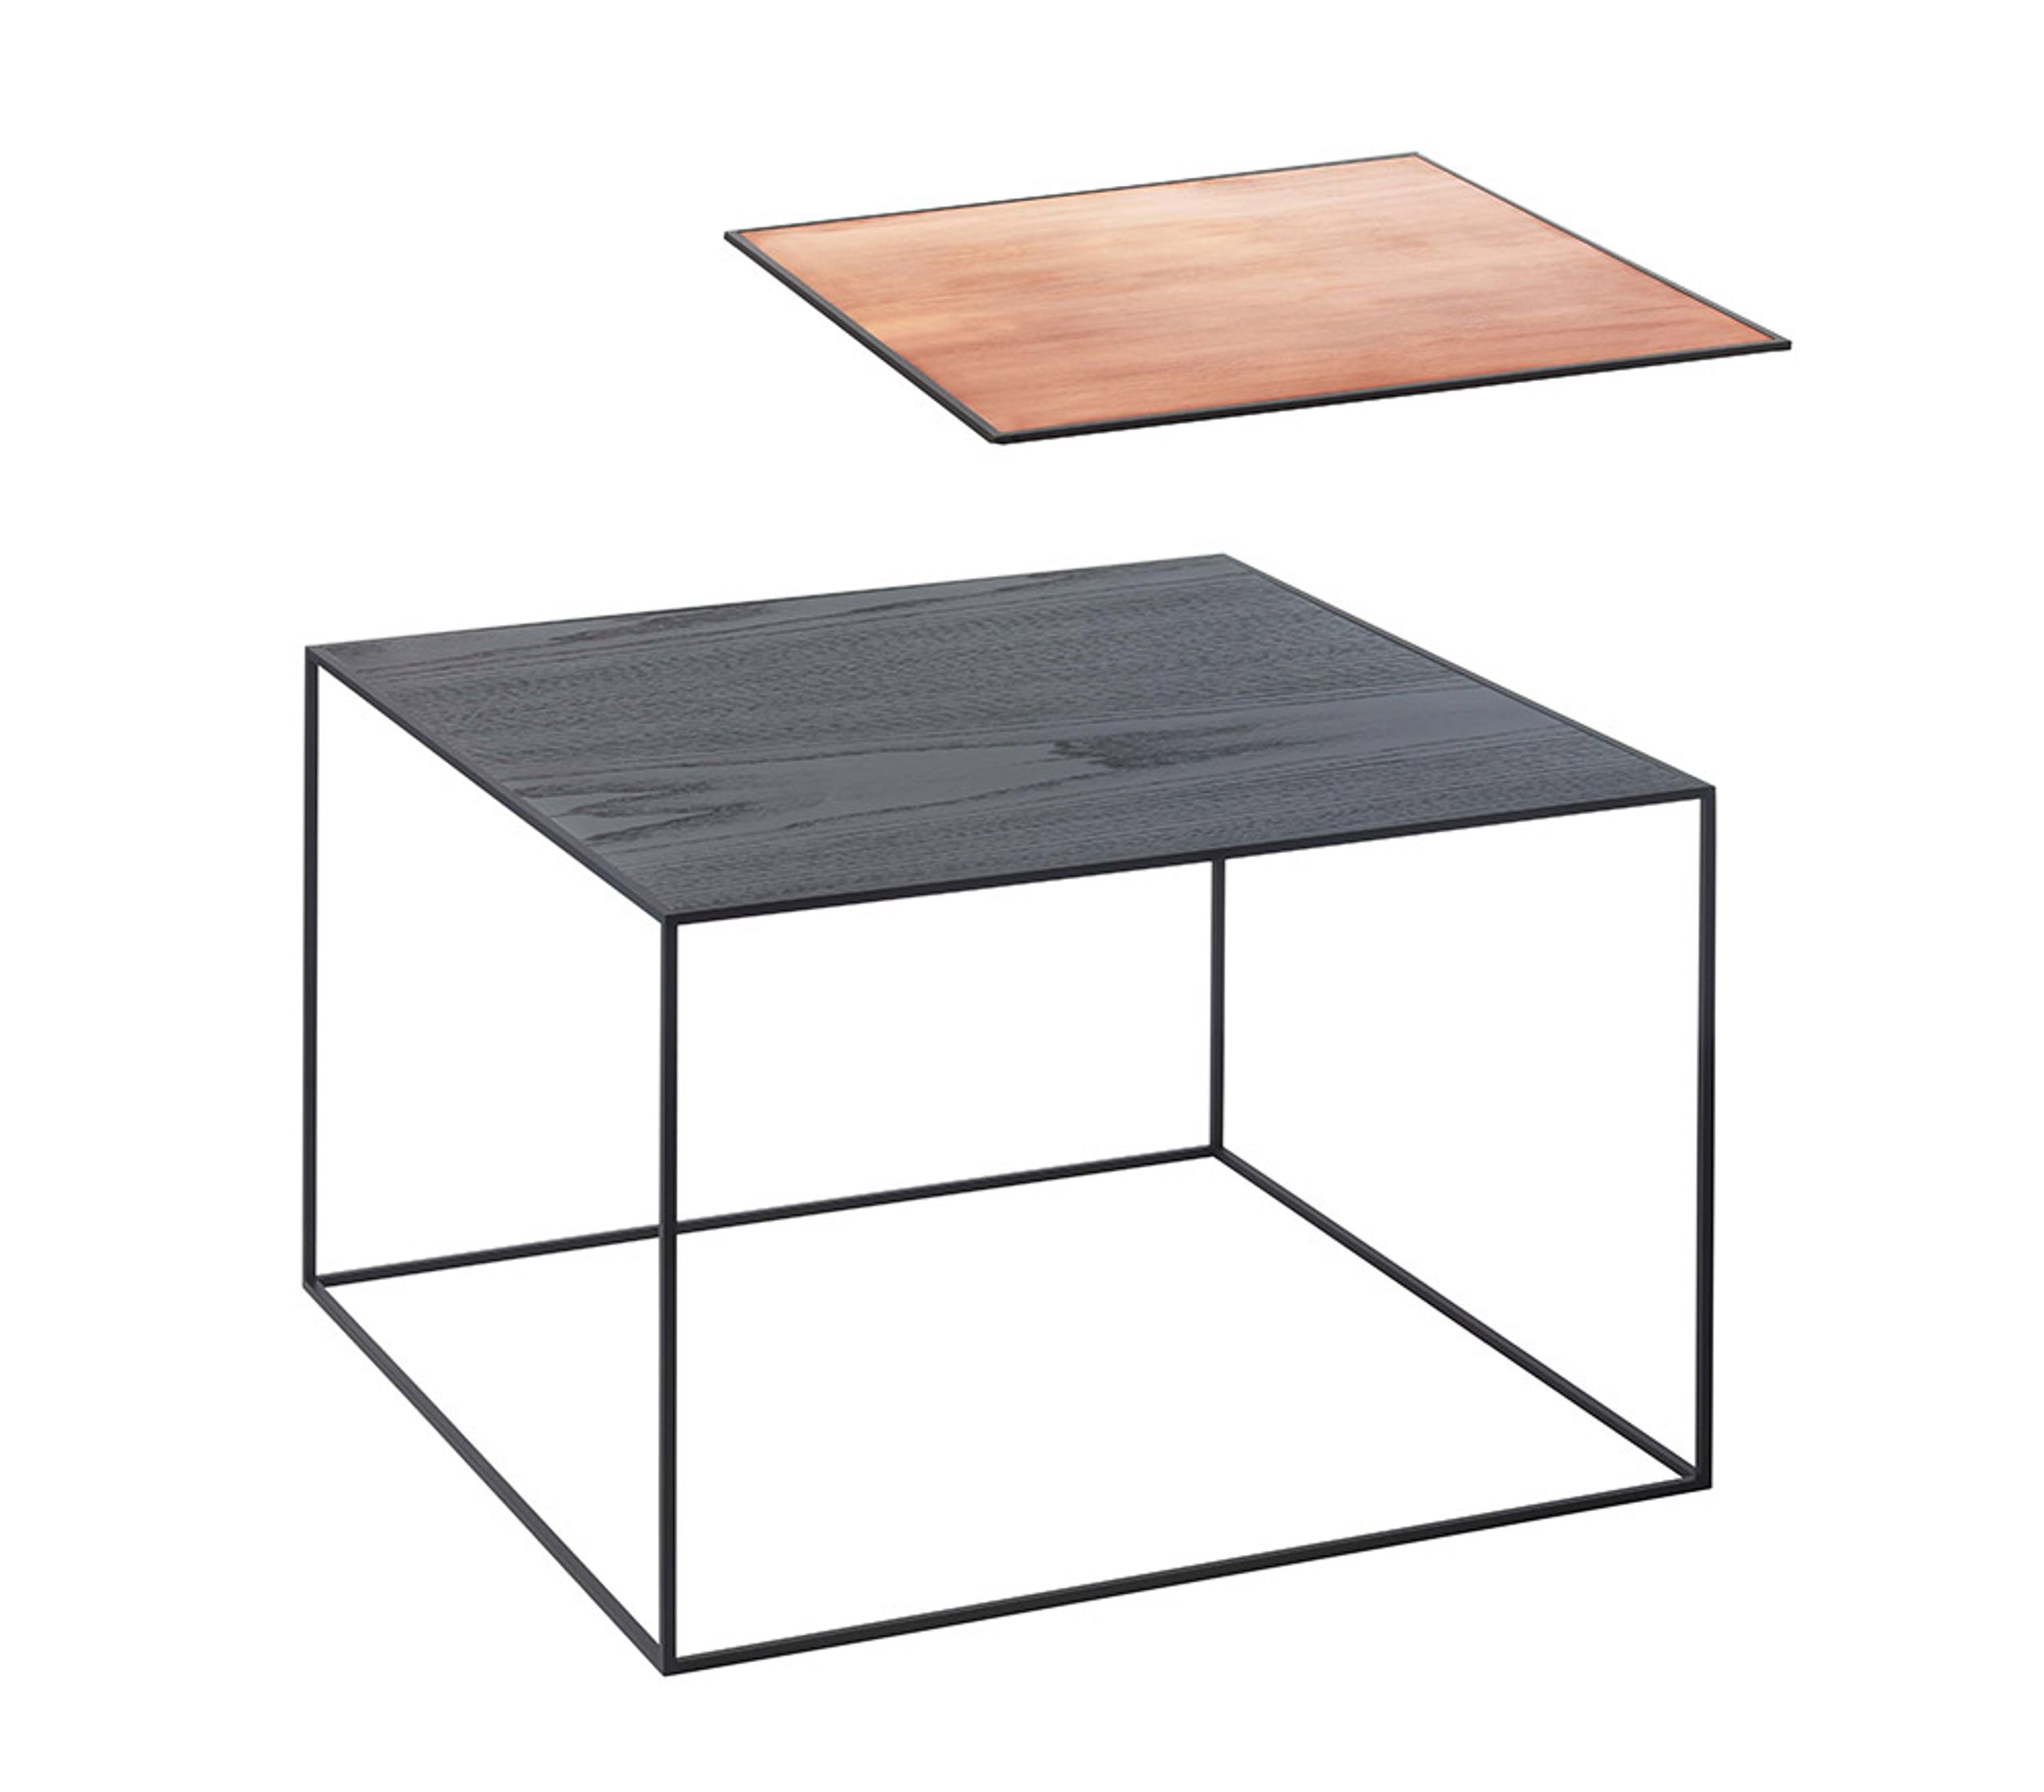 By Lassen - Conseil d'administration - Twin Tabletops - Black Stained Ash / Copper - Twin 49